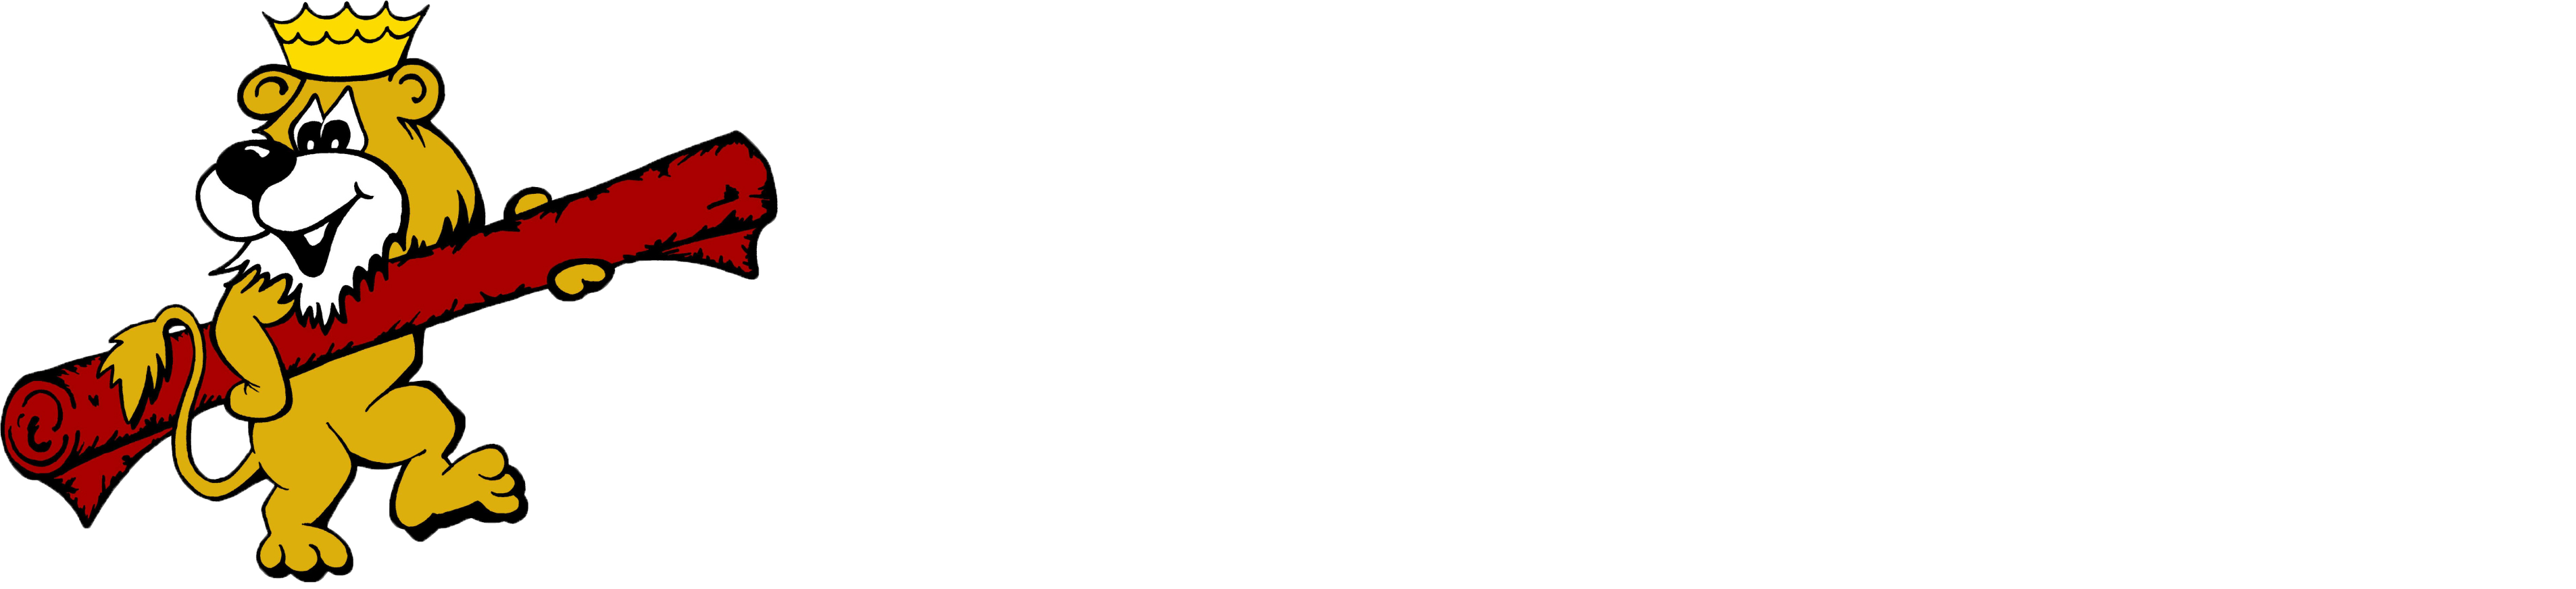 Kings Flooring Solutions, A Division of Remnant King Inc.